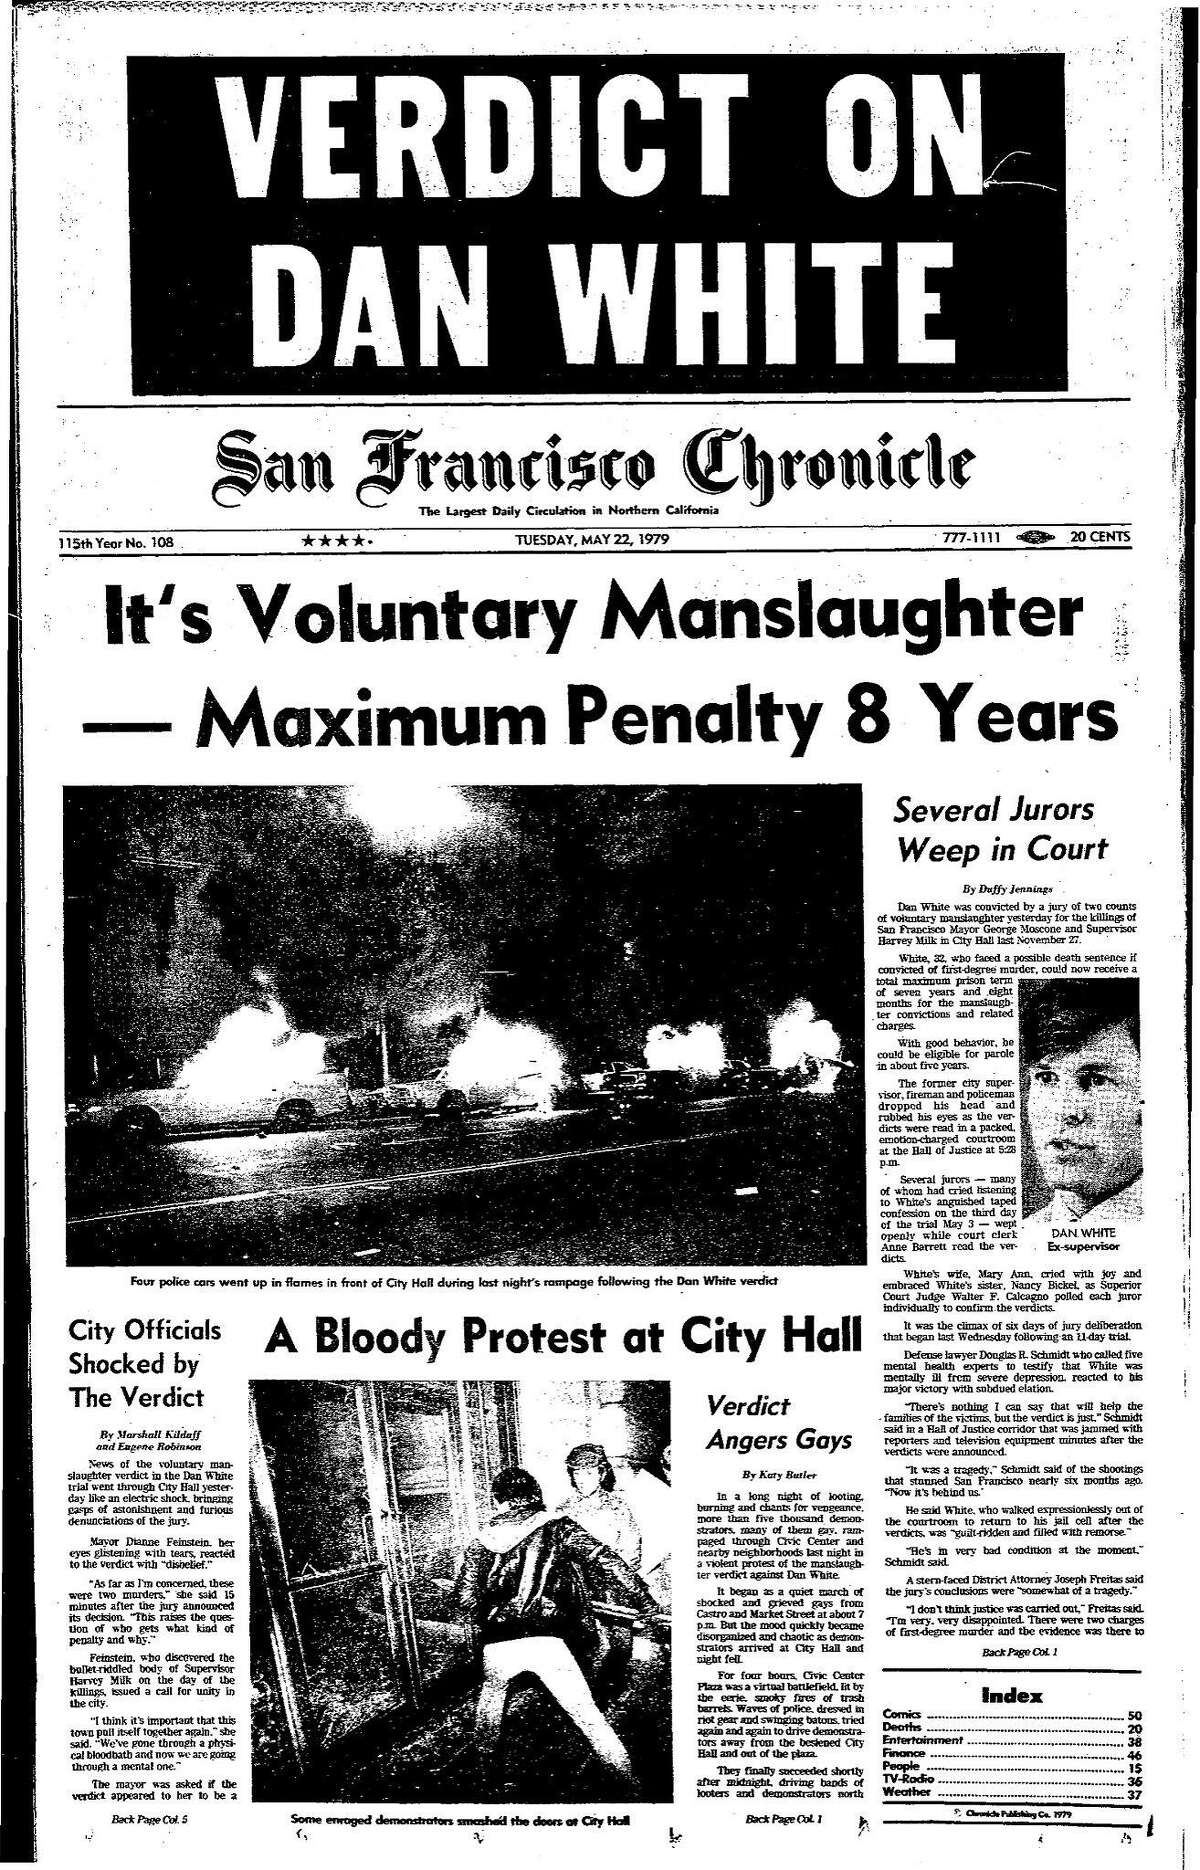 Historic Chronicle Front Page May 22, 1979 Dan White Verdict sets off violent protests Chron365, Chroncover